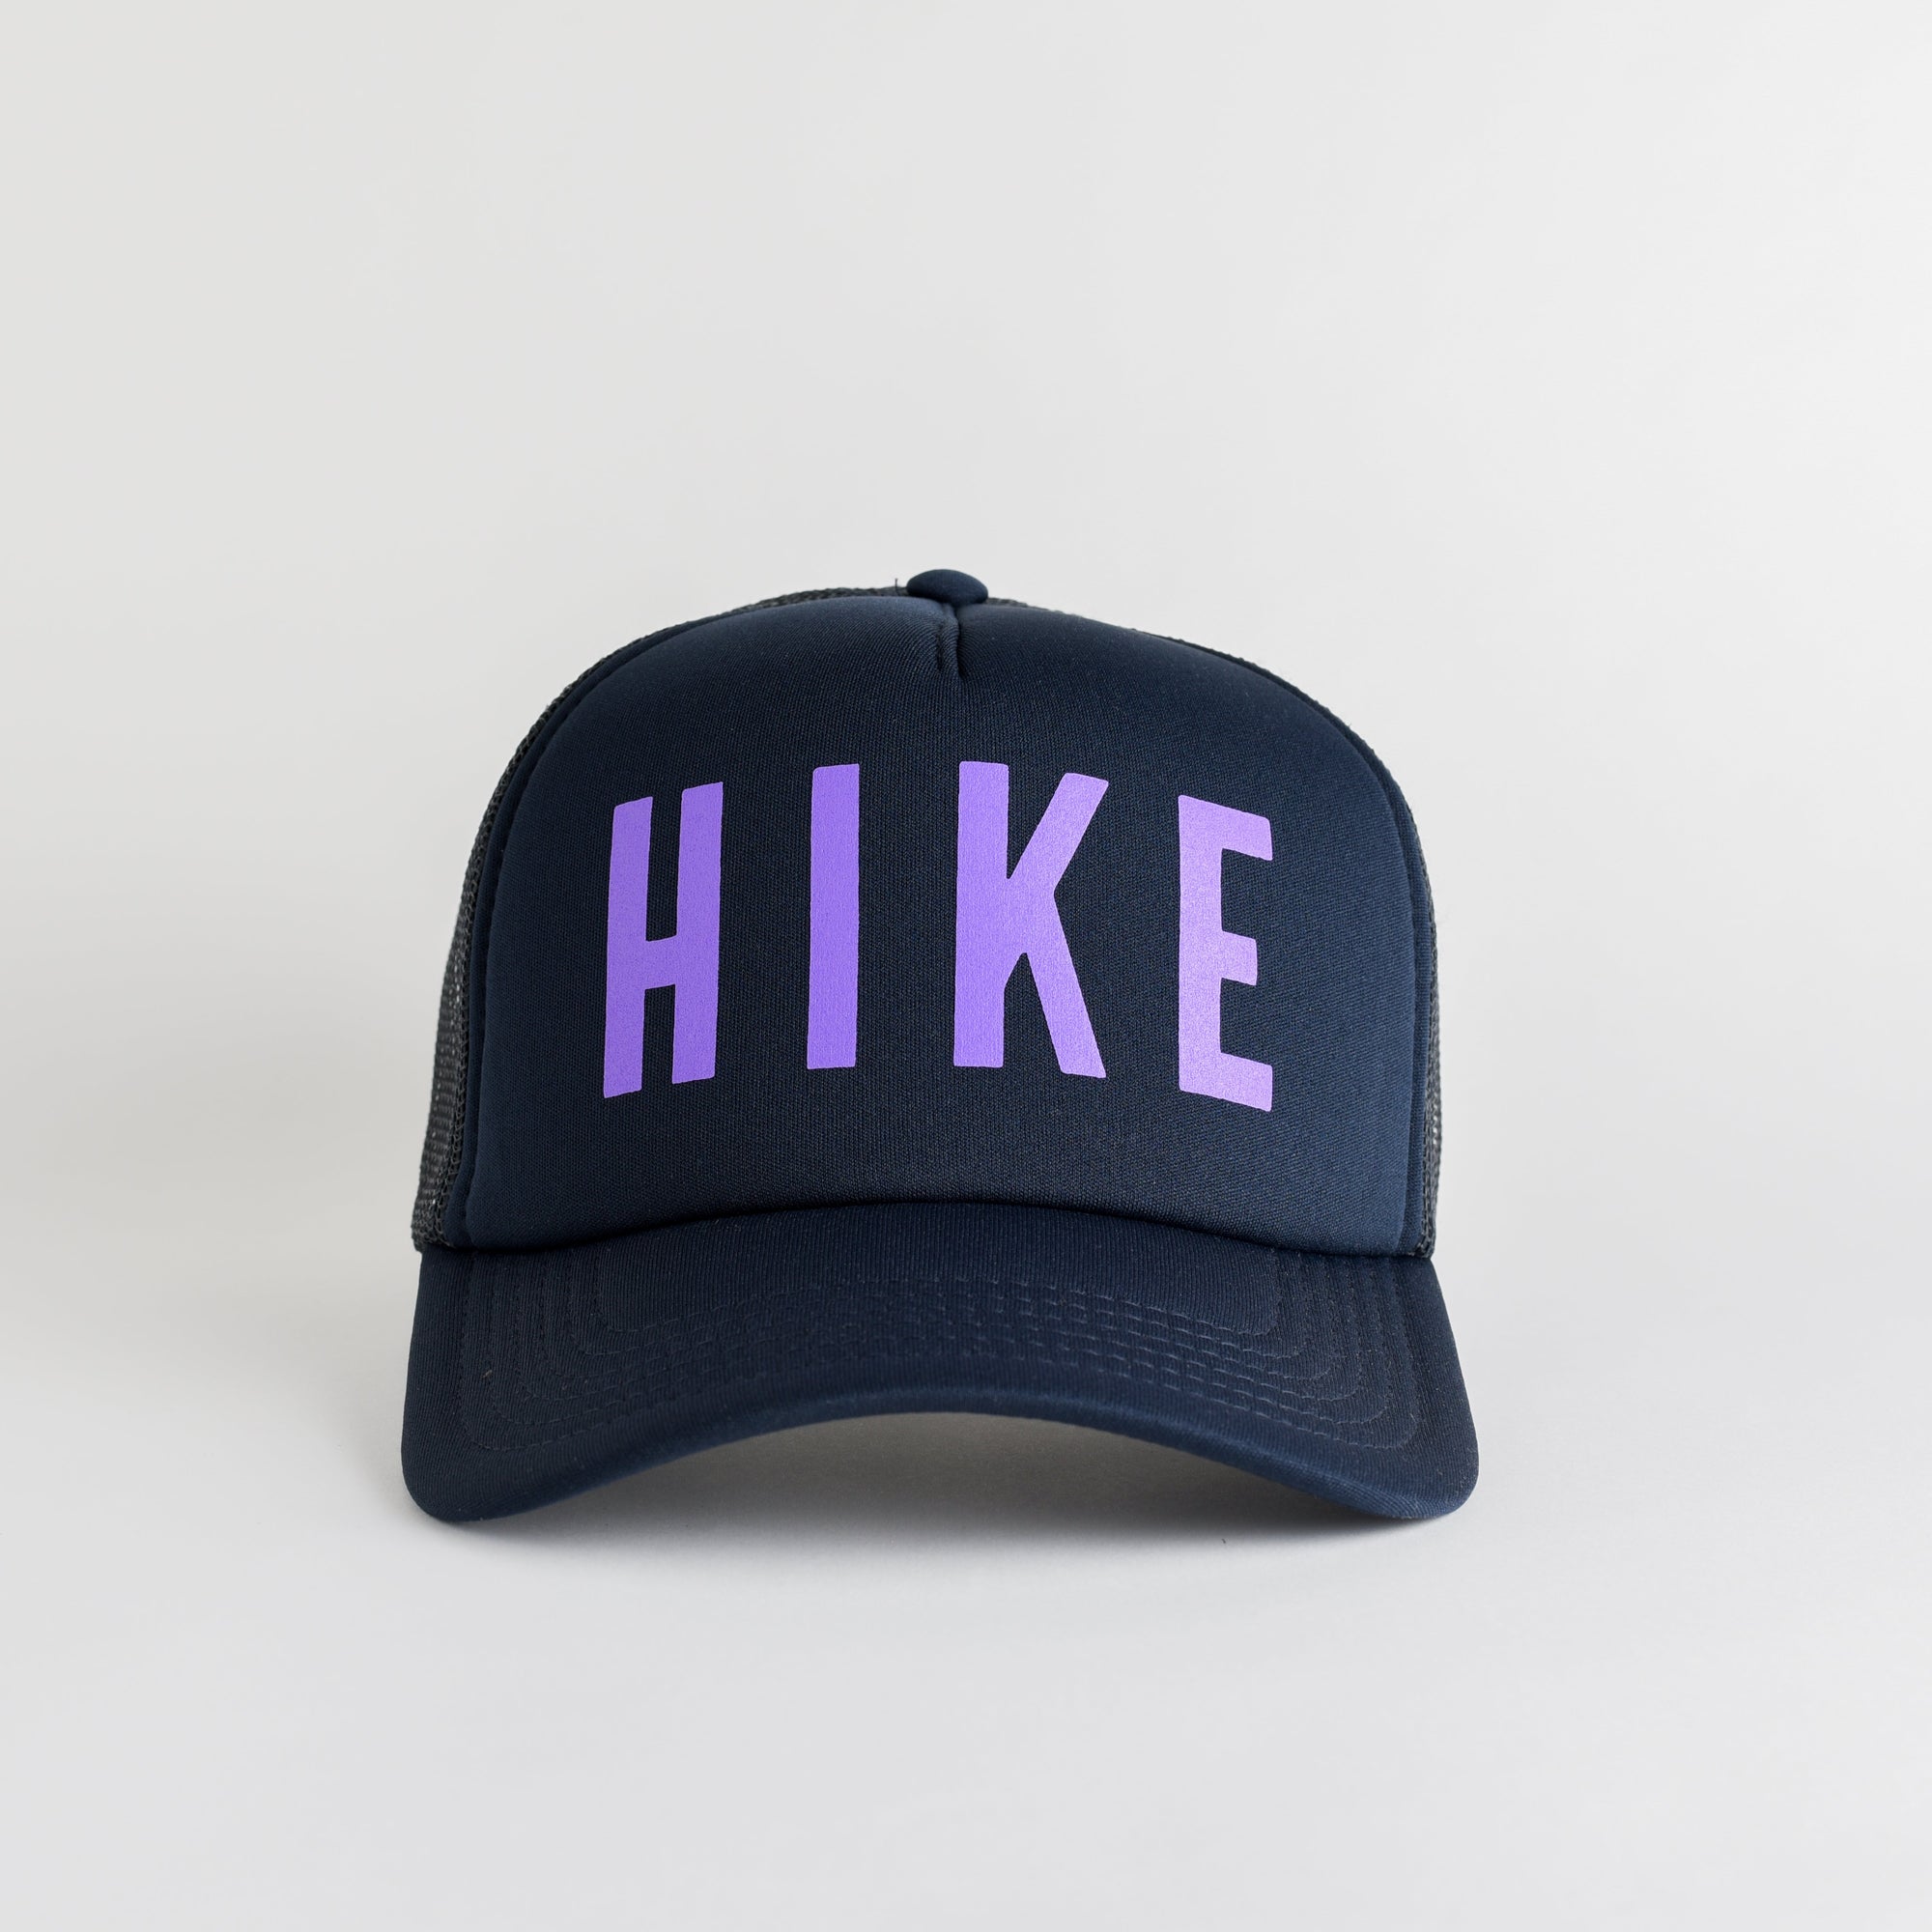 Hike Recycled Trucker Hat - navy